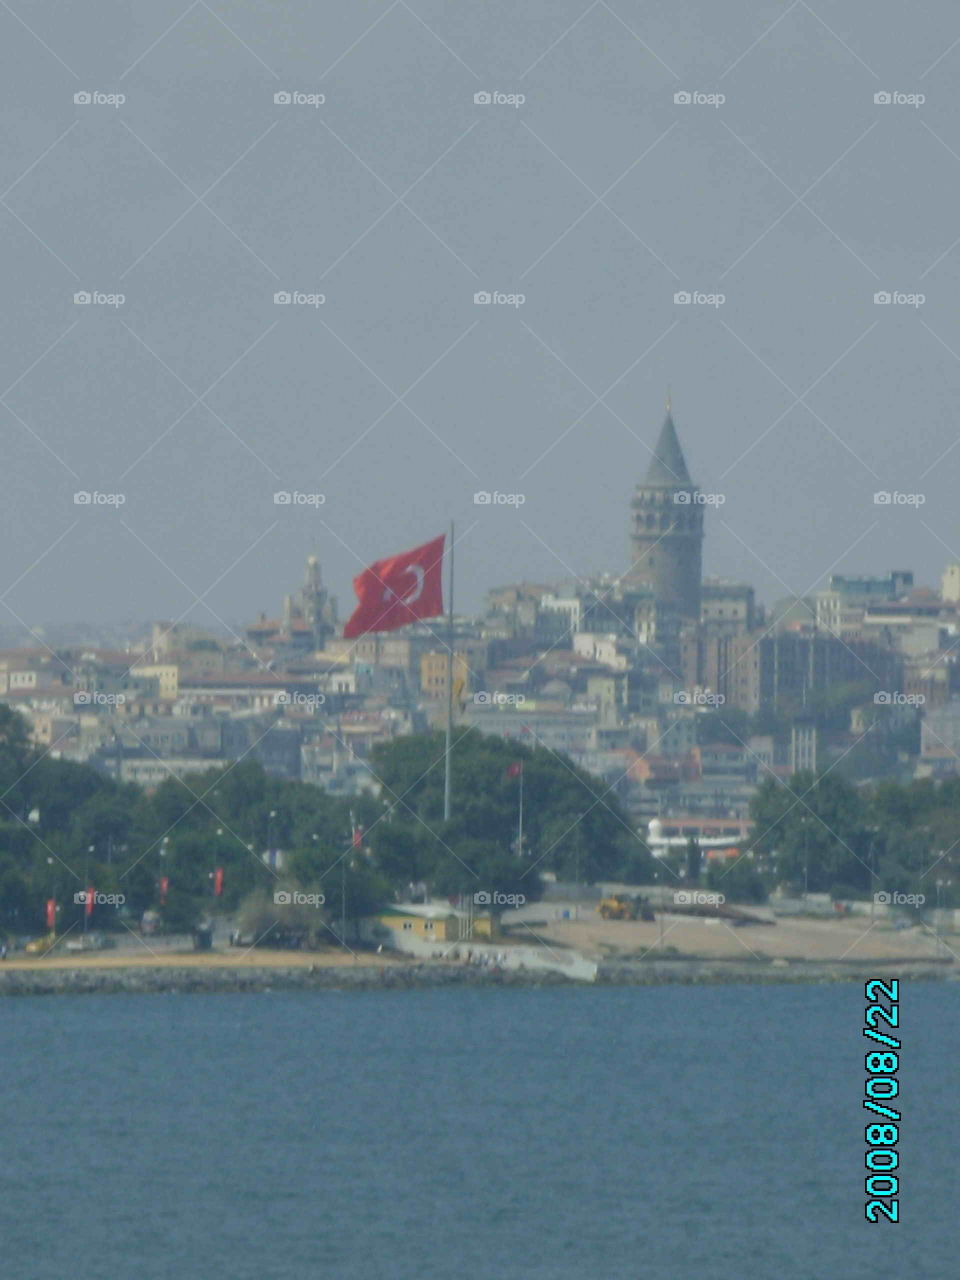 #istanbul#flag#city#tower#respect#waterside#turkey#